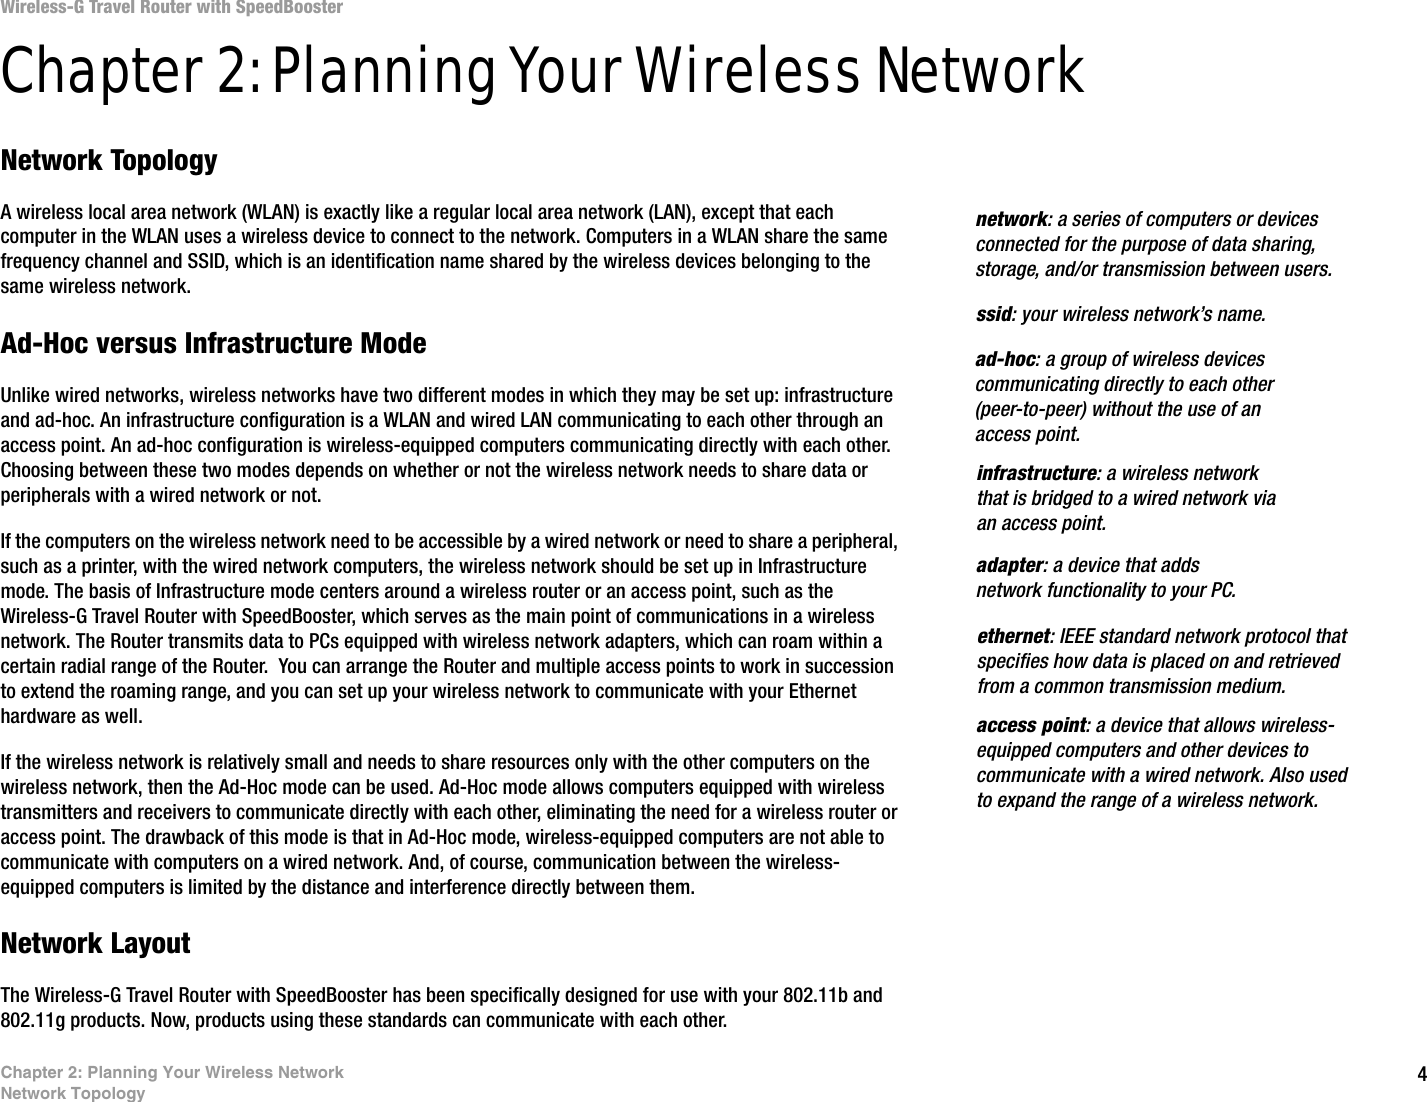 4Chapter 2: Planning Your Wireless NetworkNetwork TopologyWireless-G Travel Router with SpeedBoosterChapter 2: Planning Your Wireless NetworkNetwork TopologyA wireless local area network (WLAN) is exactly like a regular local area network (LAN), except that each computer in the WLAN uses a wireless device to connect to the network. Computers in a WLAN share the same frequency channel and SSID, which is an identification name shared by the wireless devices belonging to the same wireless network.Ad-Hoc versus Infrastructure ModeUnlike wired networks, wireless networks have two different modes in which they may be set up: infrastructure and ad-hoc. An infrastructure configuration is a WLAN and wired LAN communicating to each other through an access point. An ad-hoc configuration is wireless-equipped computers communicating directly with each other. Choosing between these two modes depends on whether or not the wireless network needs to share data or peripherals with a wired network or not. If the computers on the wireless network need to be accessible by a wired network or need to share a peripheral, such as a printer, with the wired network computers, the wireless network should be set up in Infrastructure mode. The basis of Infrastructure mode centers around a wireless router or an access point, such as the Wireless-G Travel Router with SpeedBooster, which serves as the main point of communications in a wireless network. The Router transmits data to PCs equipped with wireless network adapters, which can roam within a certain radial range of the Router.  You can arrange the Router and multiple access points to work in succession to extend the roaming range, and you can set up your wireless network to communicate with your Ethernet hardware as well. If the wireless network is relatively small and needs to share resources only with the other computers on the wireless network, then the Ad-Hoc mode can be used. Ad-Hoc mode allows computers equipped with wireless transmitters and receivers to communicate directly with each other, eliminating the need for a wireless router or access point. The drawback of this mode is that in Ad-Hoc mode, wireless-equipped computers are not able to communicate with computers on a wired network. And, of course, communication between the wireless-equipped computers is limited by the distance and interference directly between them. Network LayoutThe Wireless-G Travel Router with SpeedBooster has been specifically designed for use with your 802.11b and 802.11g products. Now, products using these standards can communicate with each other.infrastructure: a wireless network that is bridged to a wired network via an access point.ssid: your wireless network’s name.ad-hoc: a group of wireless devices communicating directly to each other (peer-to-peer) without the use of an access point.access point: a device that allows wireless-equipped computers and other devices to communicate with a wired network. Also used to expand the range of a wireless network.adapter: a device that adds network functionality to your PC.ethernet: IEEE standard network protocol that specifies how data is placed on and retrieved from a common transmission medium.network: a series of computers or devices connected for the purpose of data sharing, storage, and/or transmission between users.